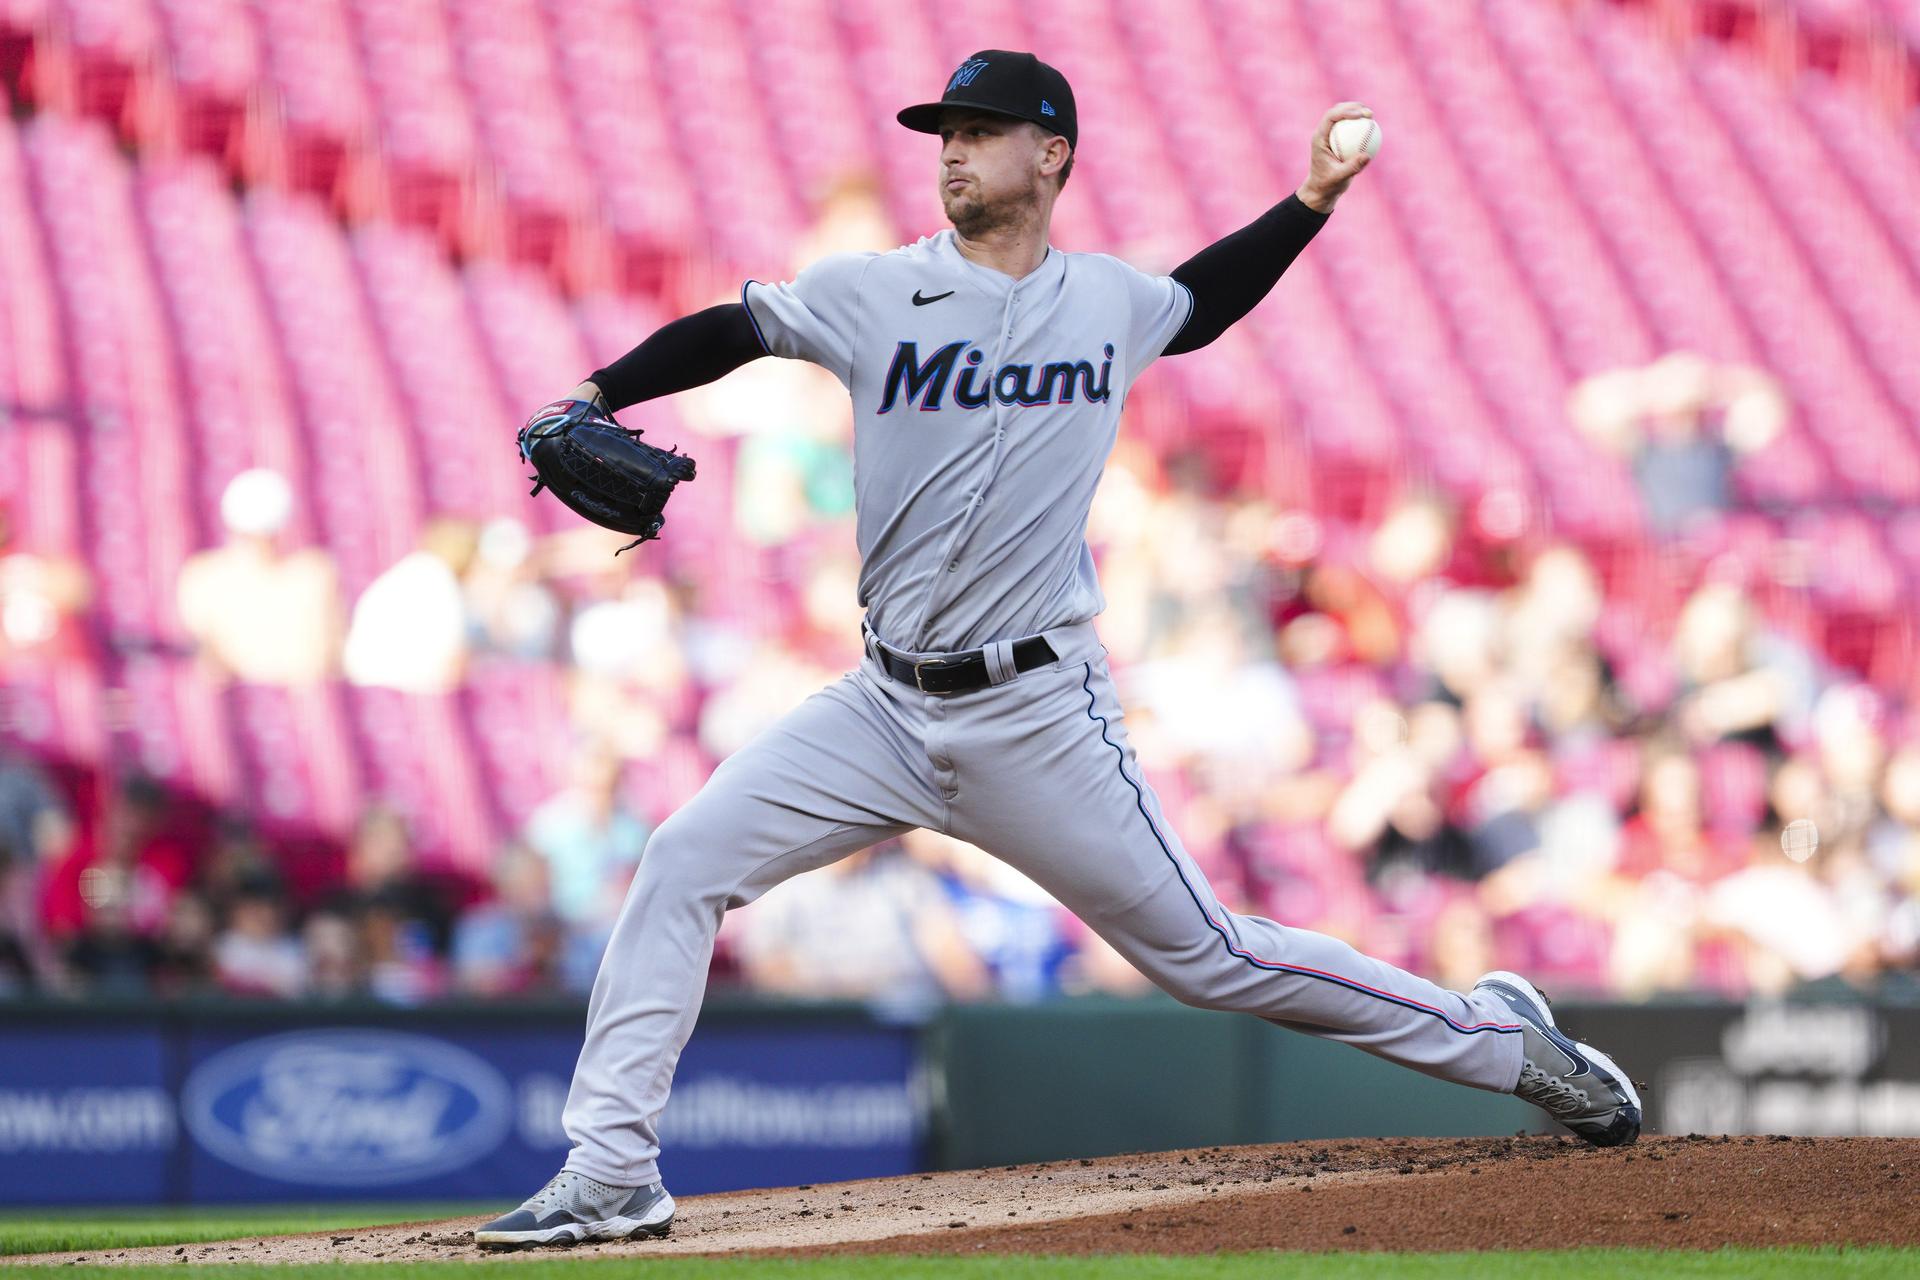 Reds vs. Marlins Player Prop Bets Today - August 2 2022: Back the Rookie Hurler Tonight